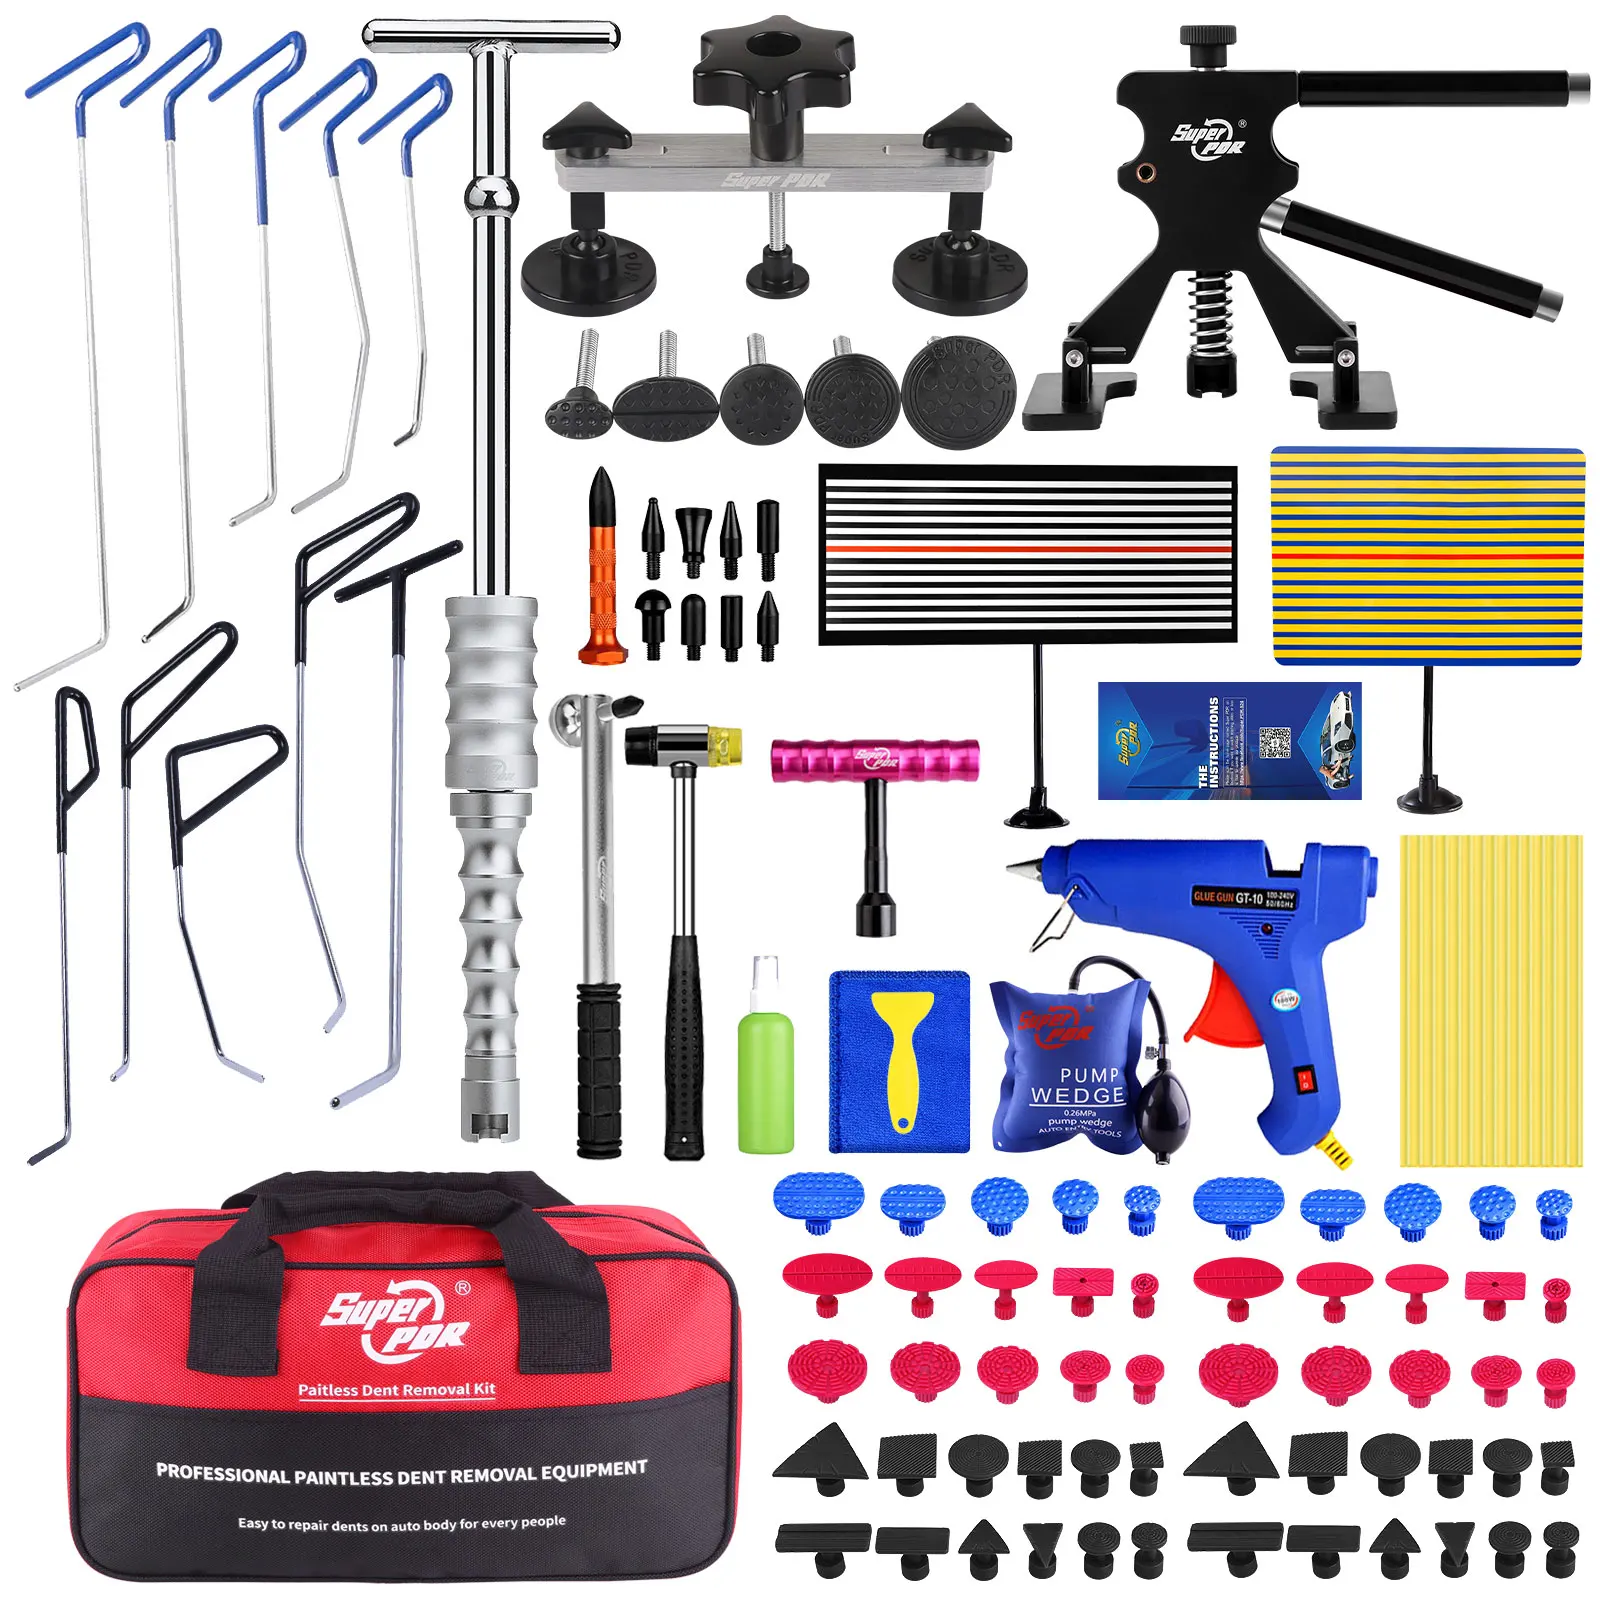 PDR Tool Professional Paintless Dent Repair Tools Dent Repair Kit Car Dent Puller with Glue Auto Dent Removal Kits